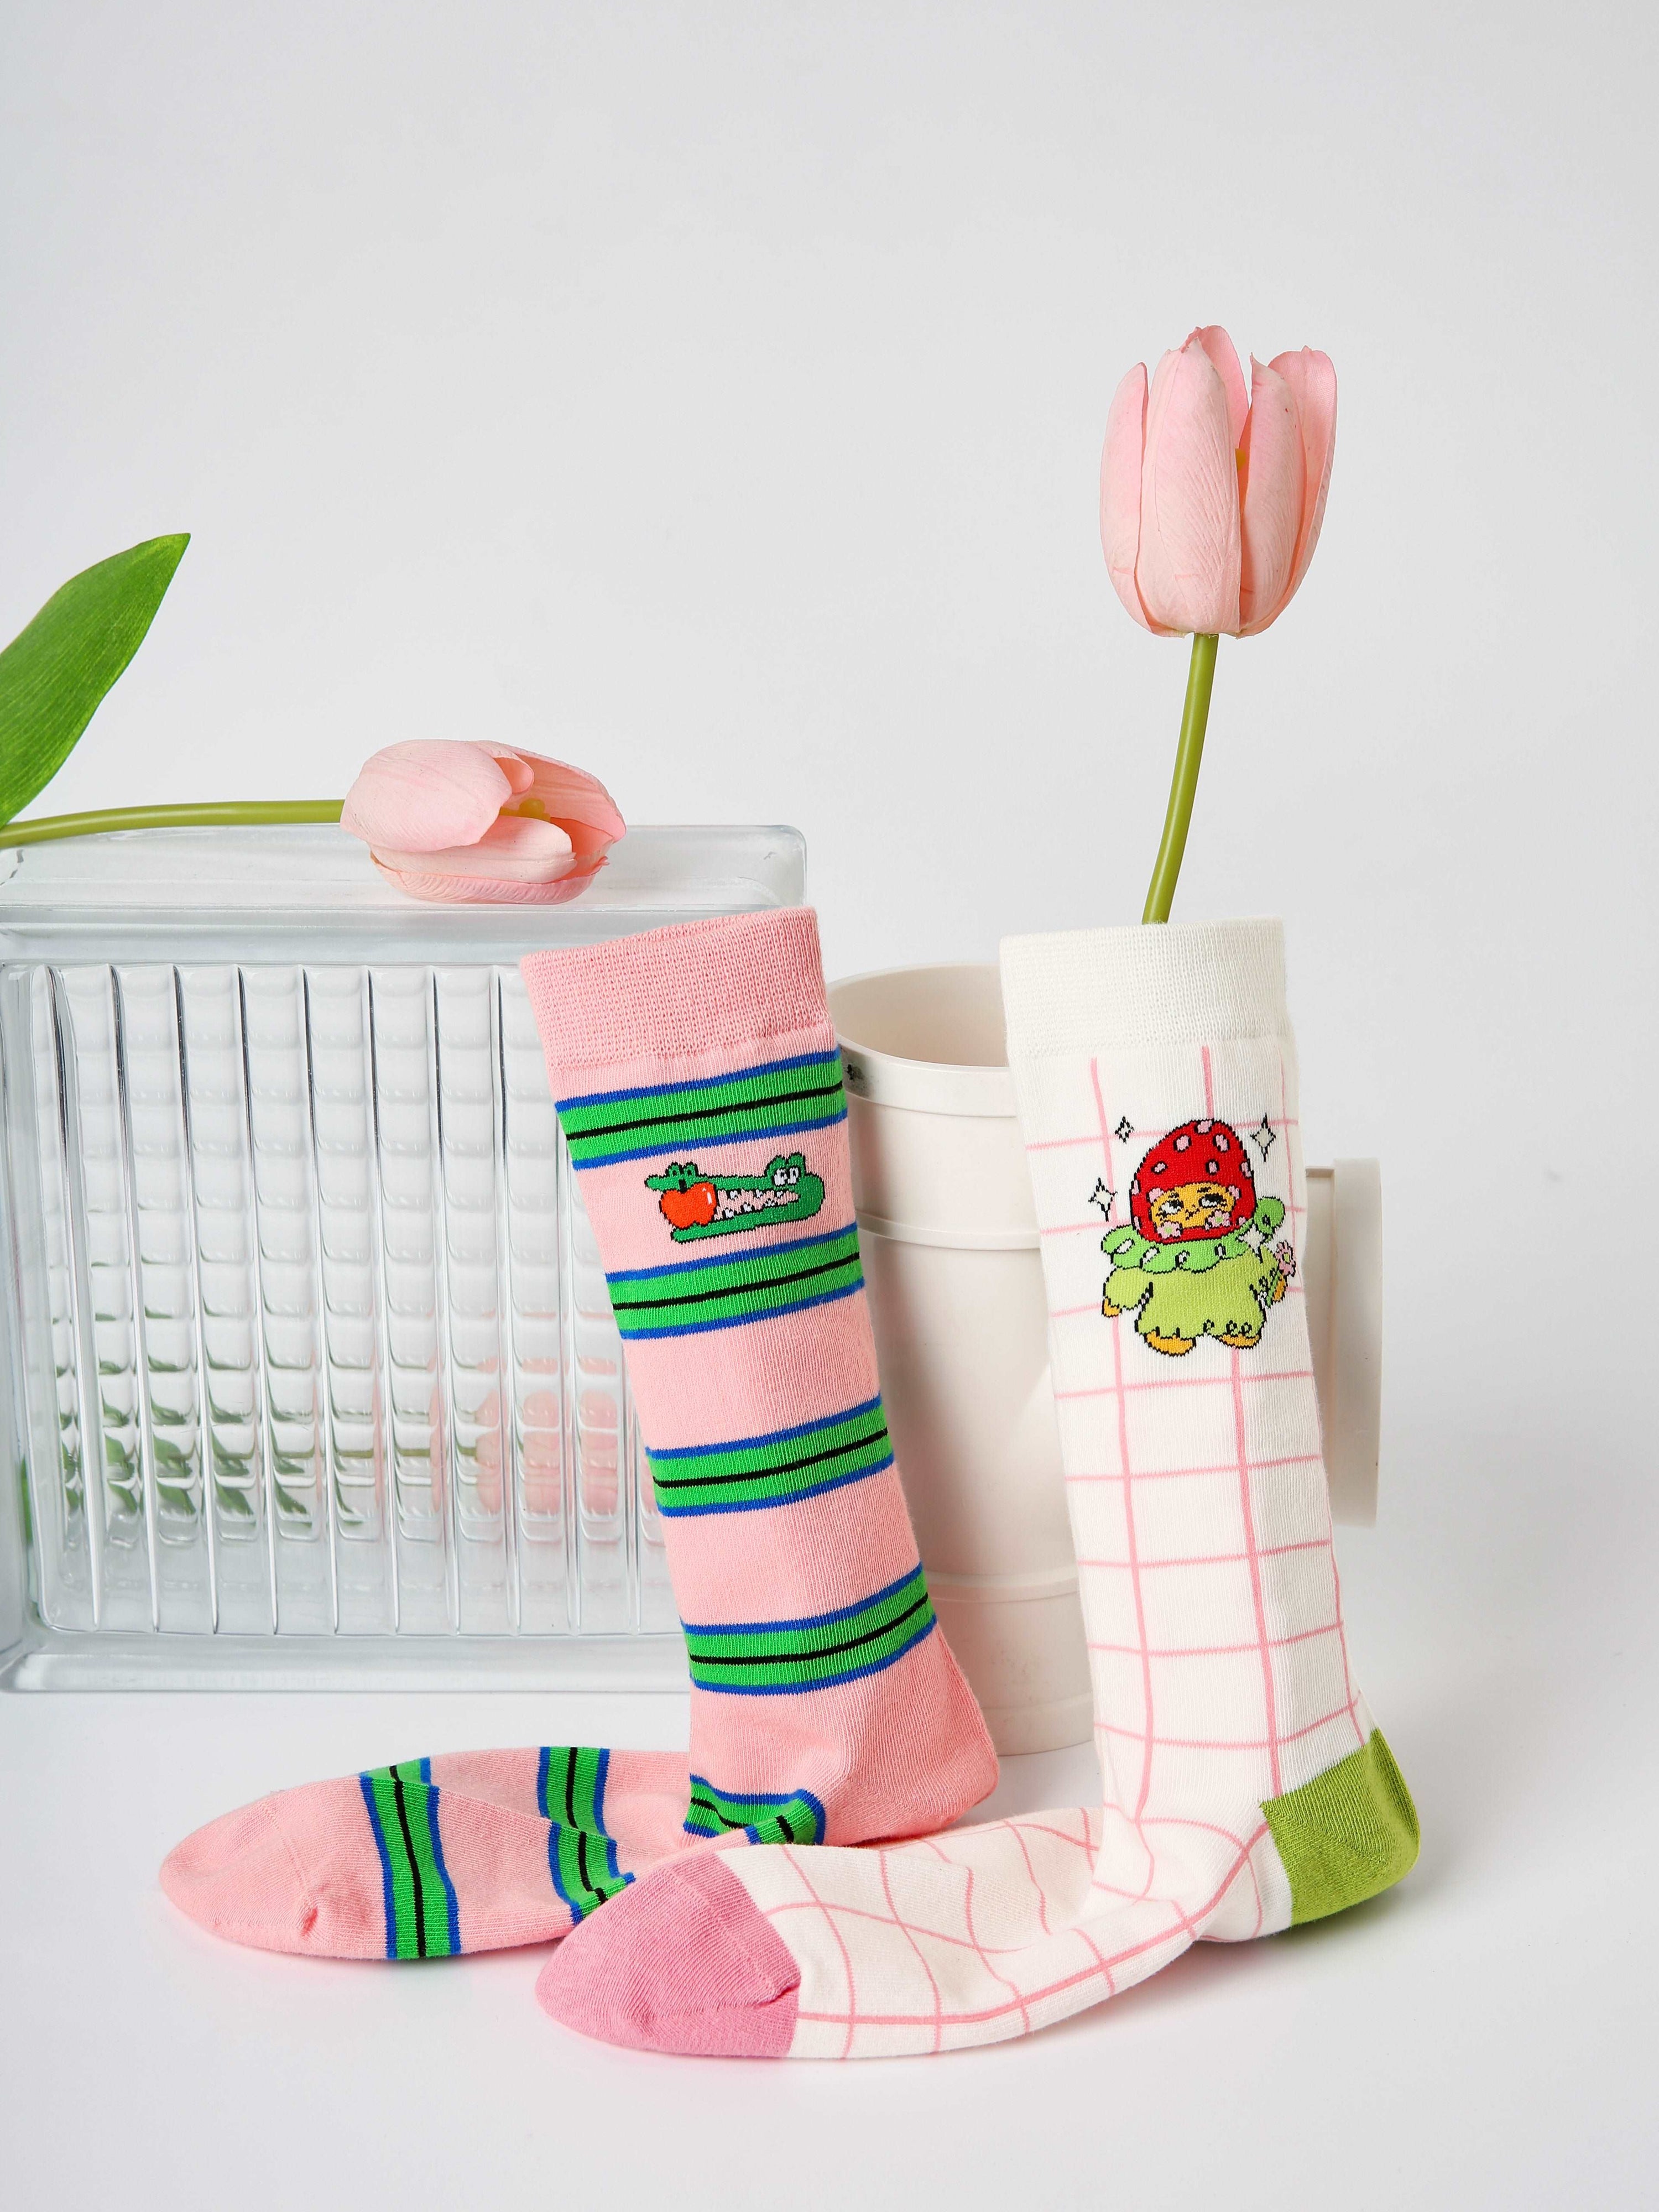 A duo of socks, one with pink and the other with green stripes